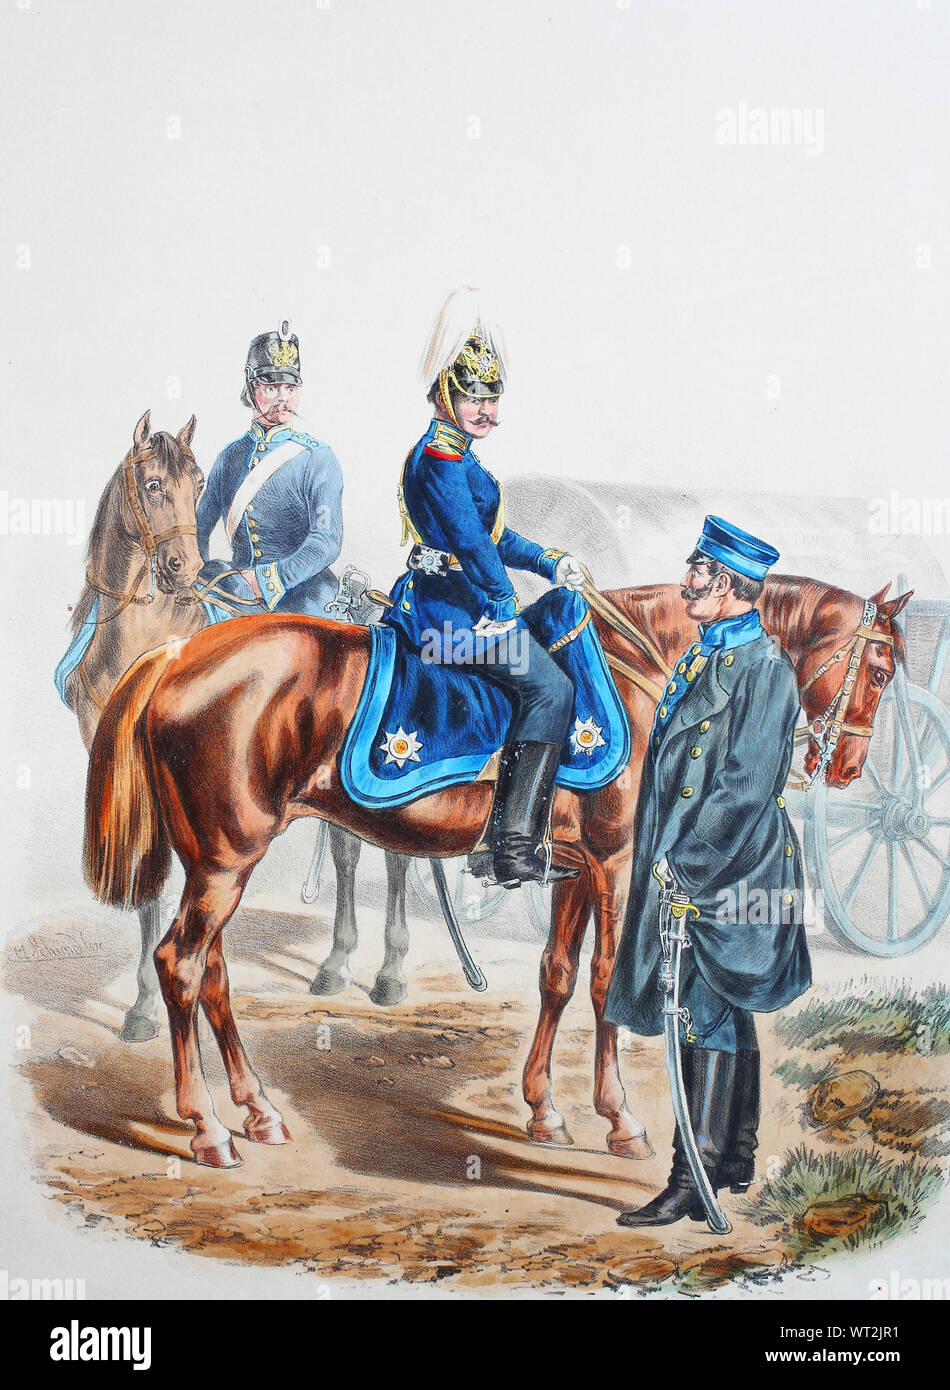 Royal Prussian Army, Guards Corps, Preußens Heer, preussische Garde, Train, Garde Train Bataillon, Garde-Train-Bataillon, Unteroffizier, Offizier, Digital improved reproduction of an illustration from the 19th century Stock Photo